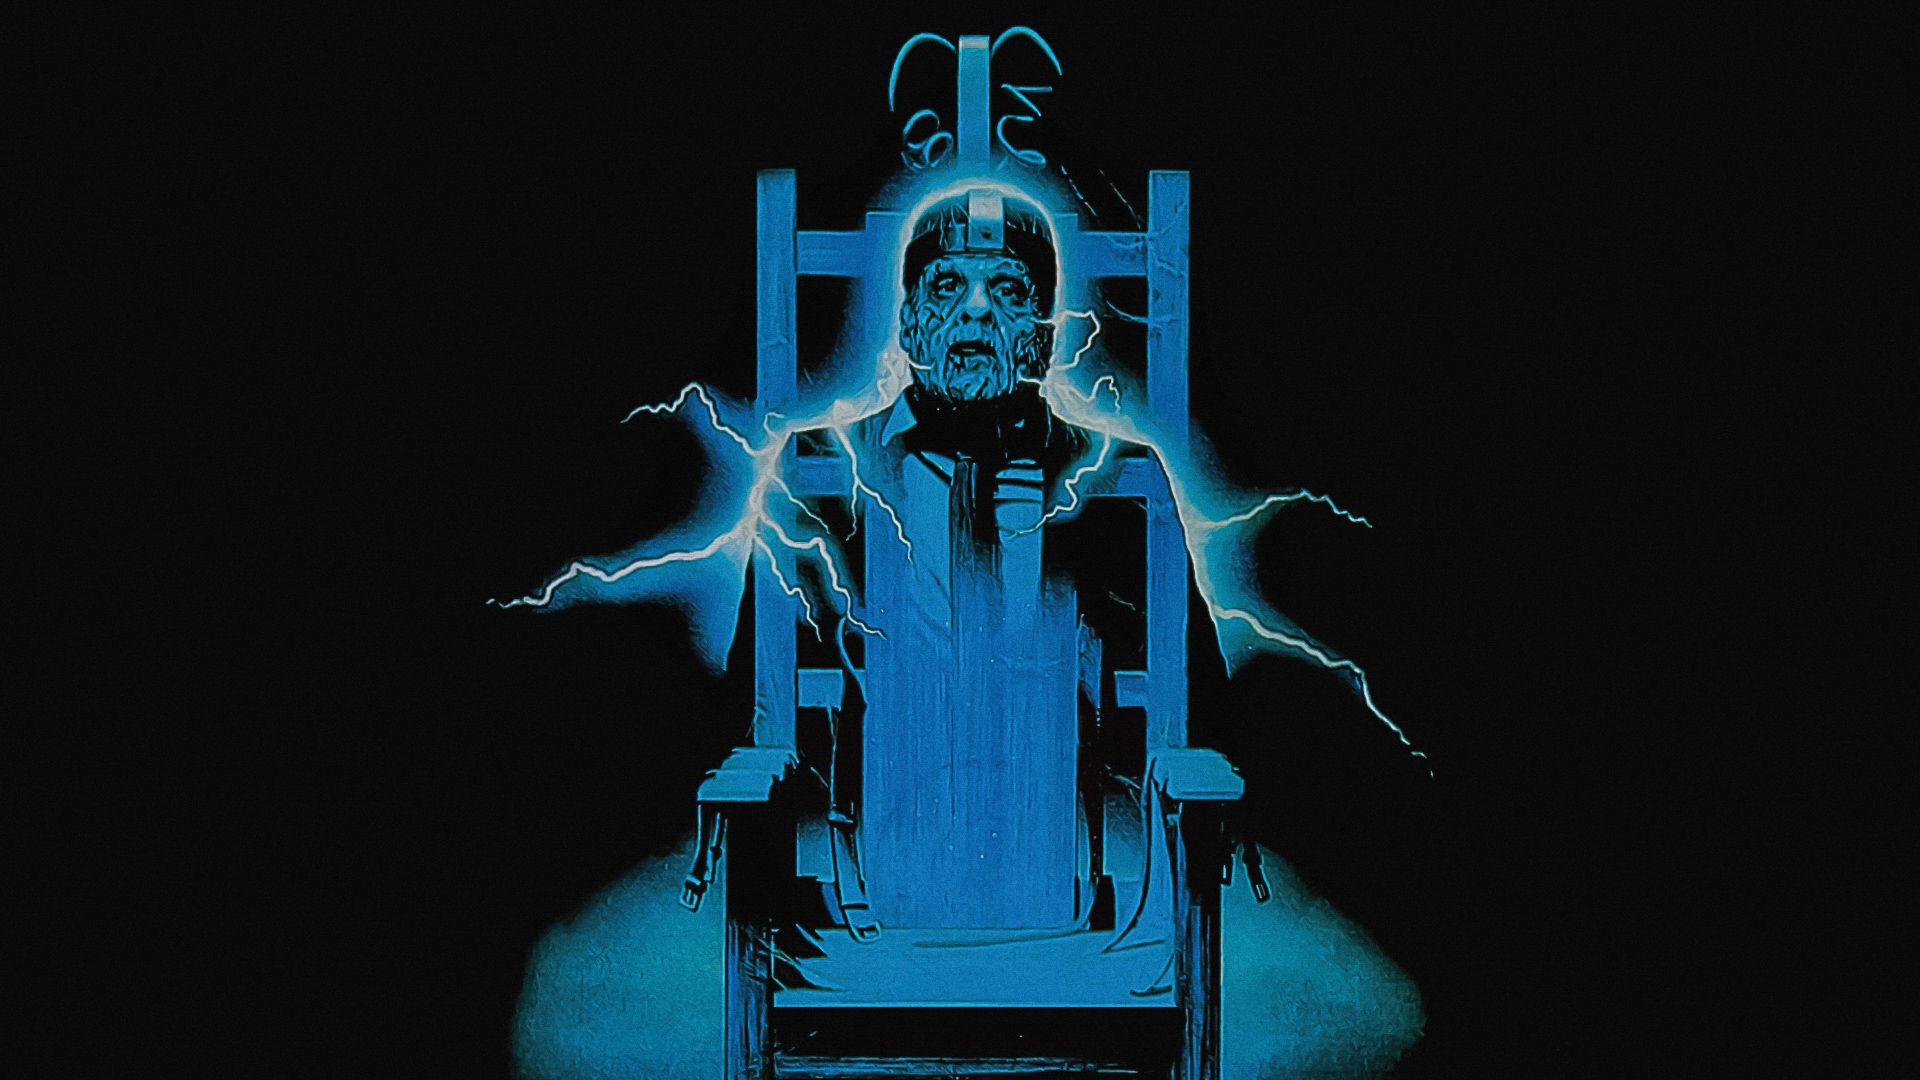 The Chair background